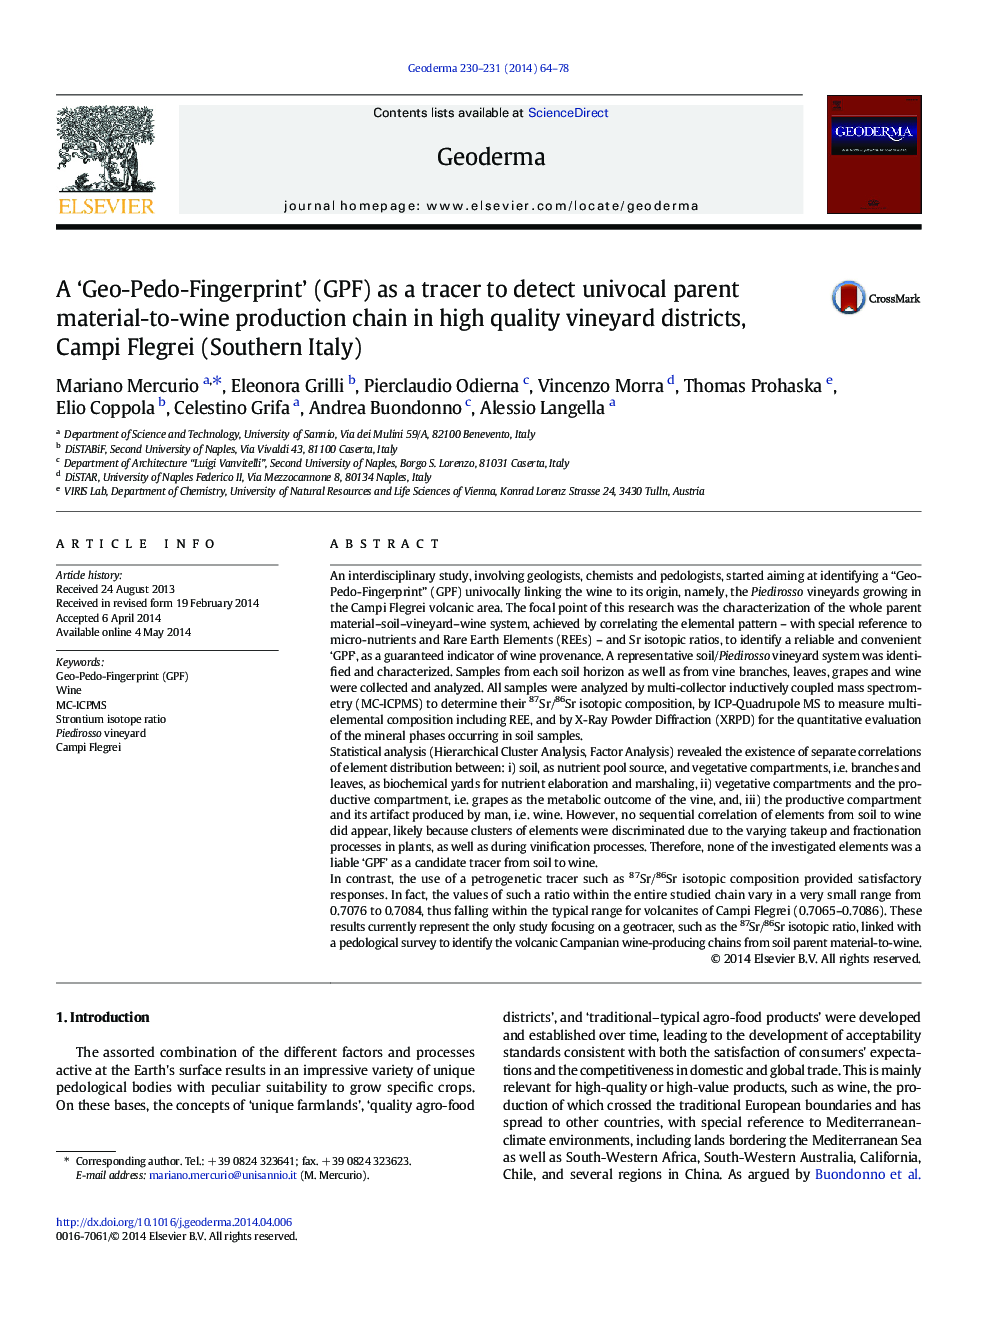 A ‘Geo-Pedo-Fingerprint’ (GPF) as a tracer to detect univocal parent material-to-wine production chain in high quality vineyard districts, Campi Flegrei (Southern Italy)